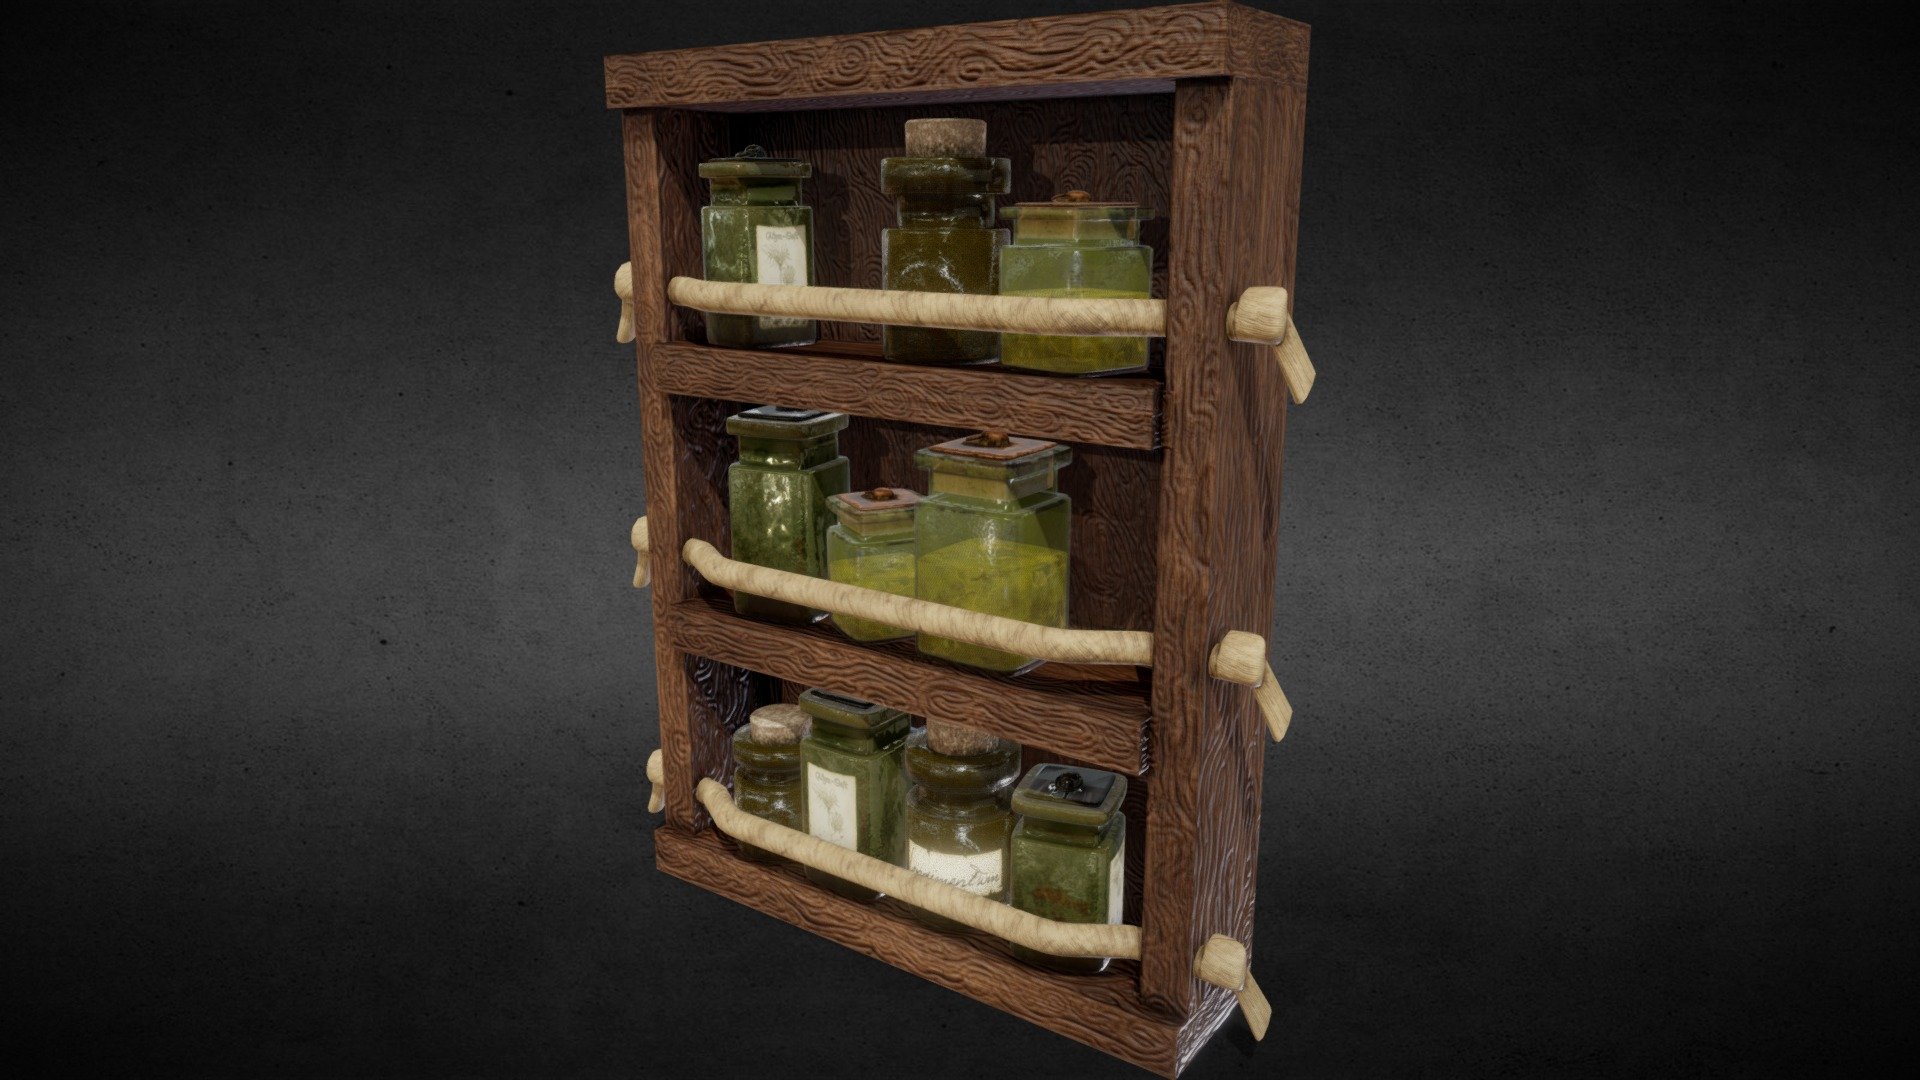 &ldquo;Potions, Herbs, small magical Equipment - everything fits in this wooden shelf.